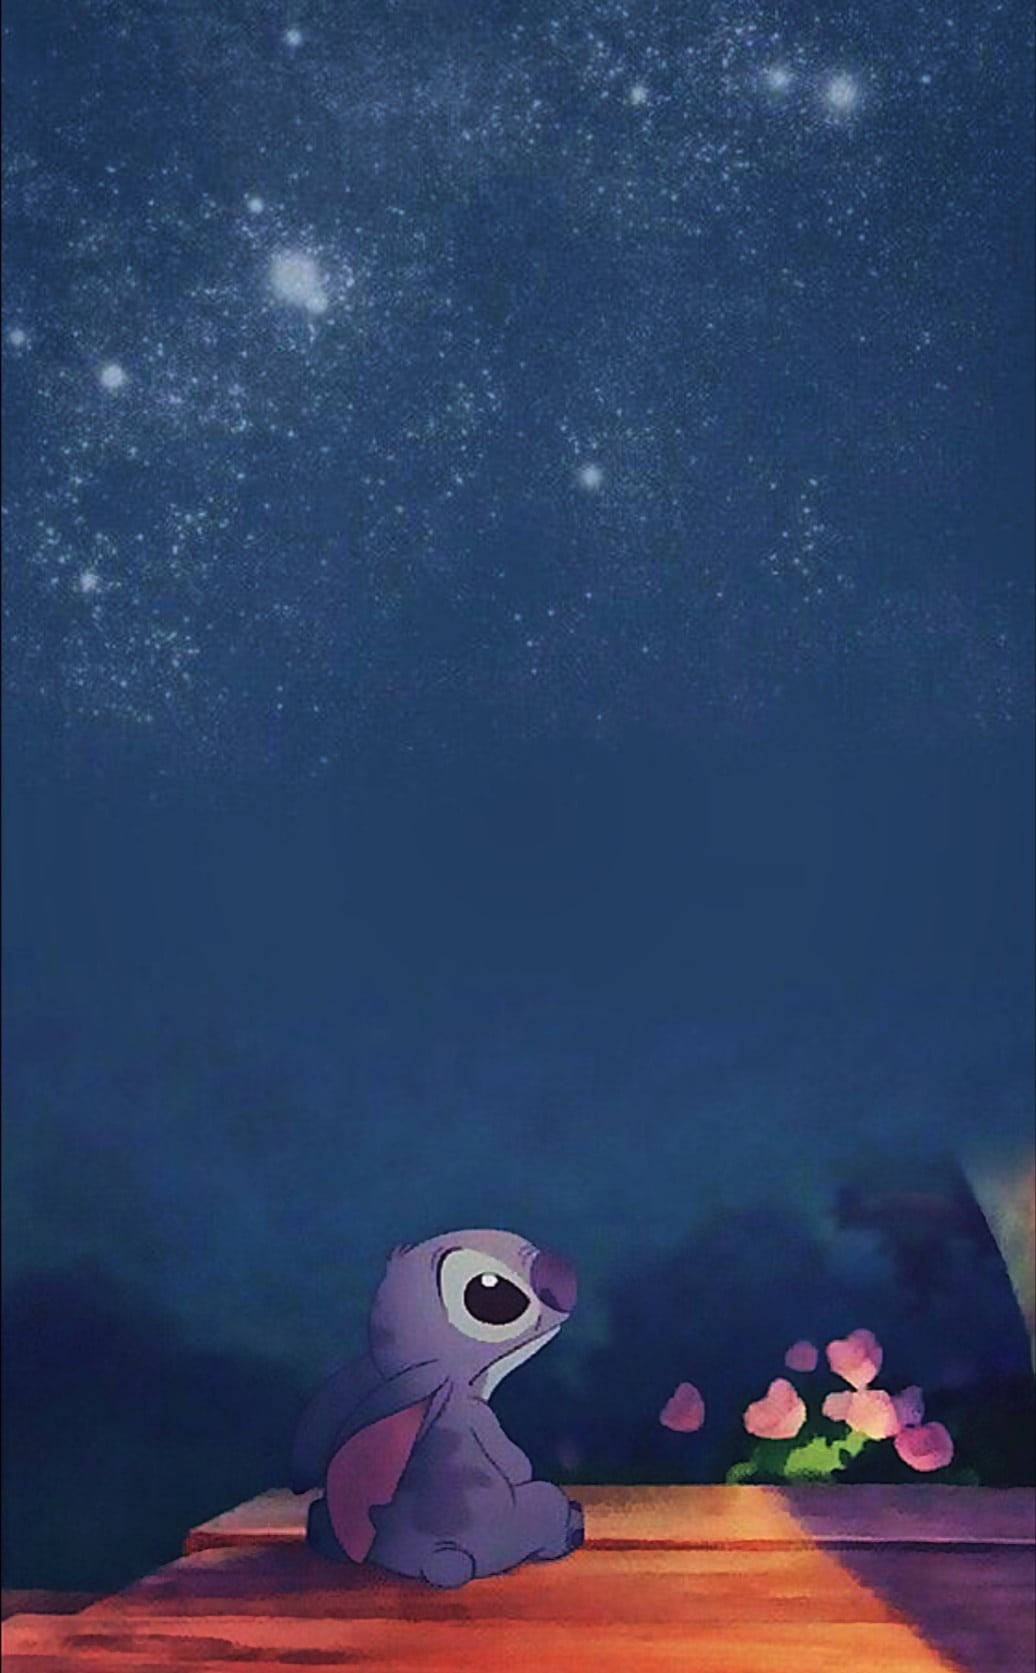 Download Stitch Looking At Night Sky Disney Wallpaper | Wallpapers.com